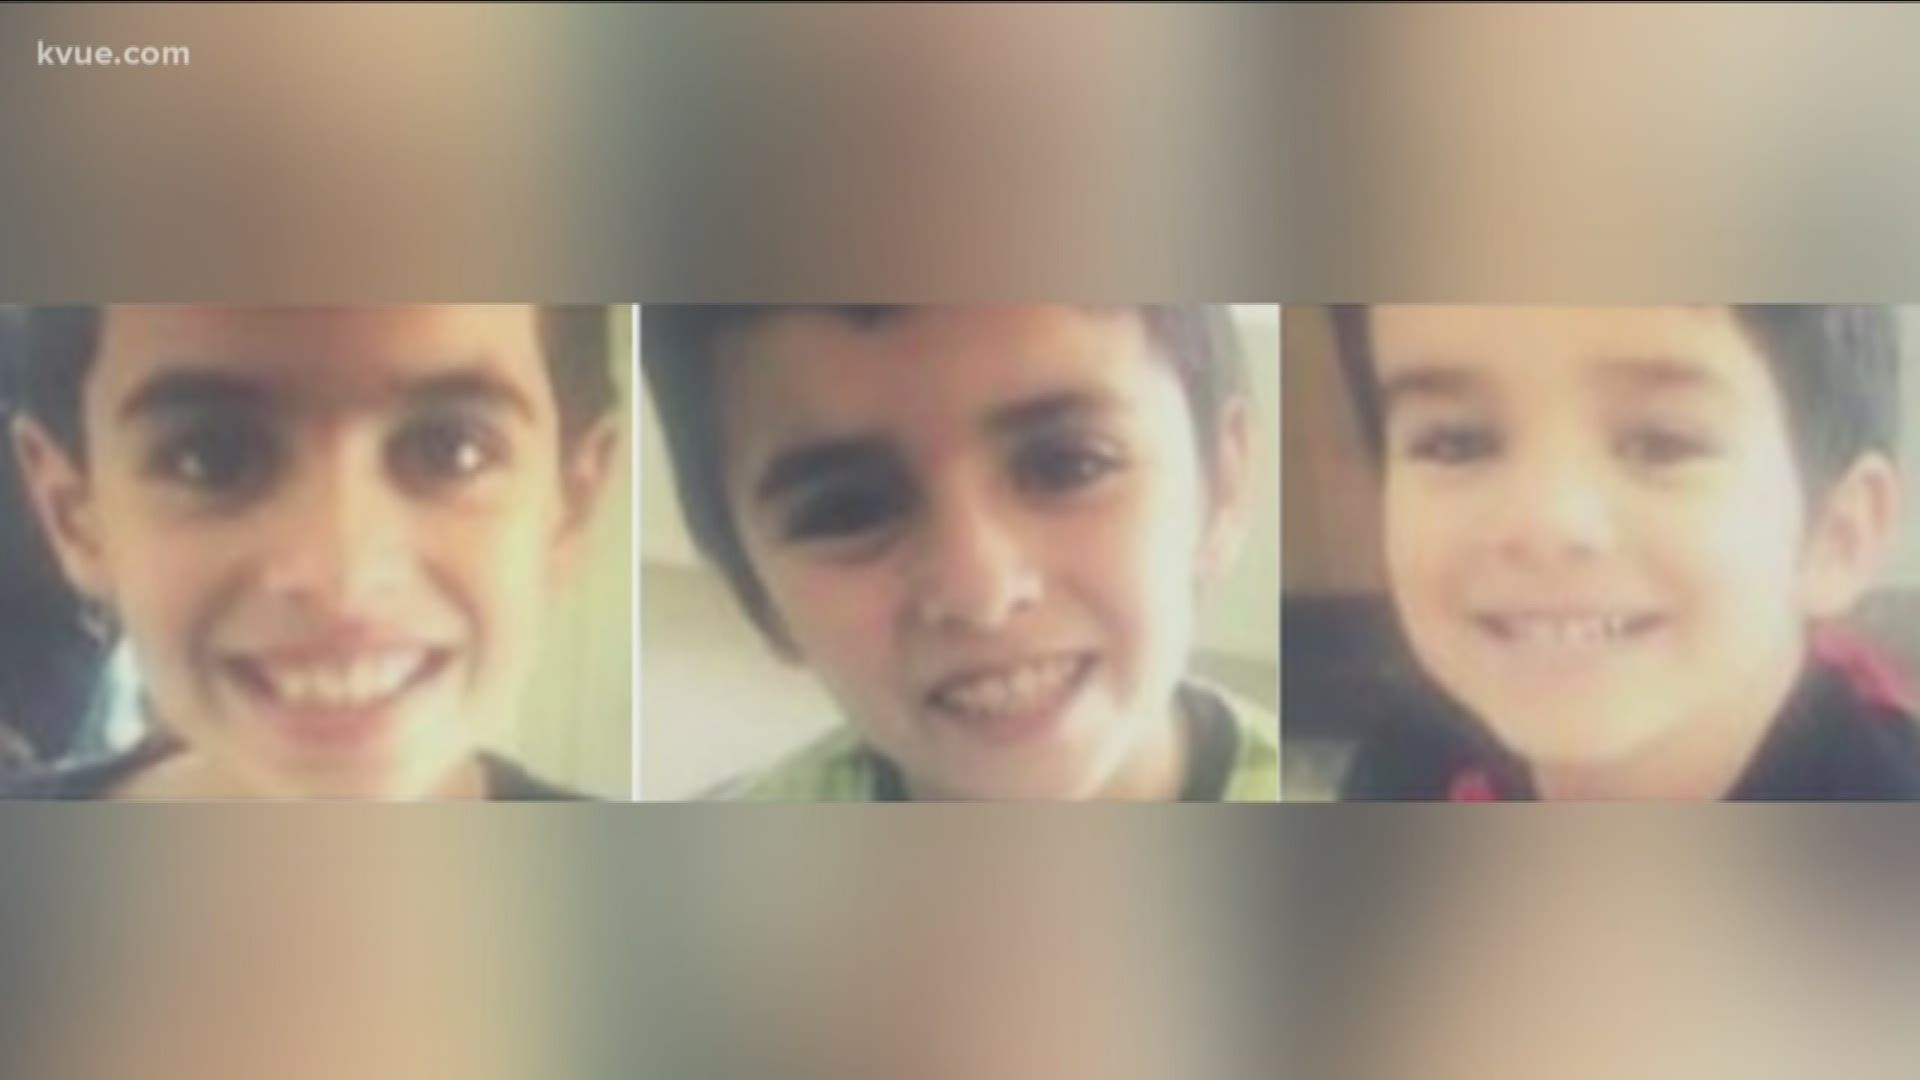 Deputies are searching for three brothers taken from Killeen, believed to have been kidnapped by their parents.